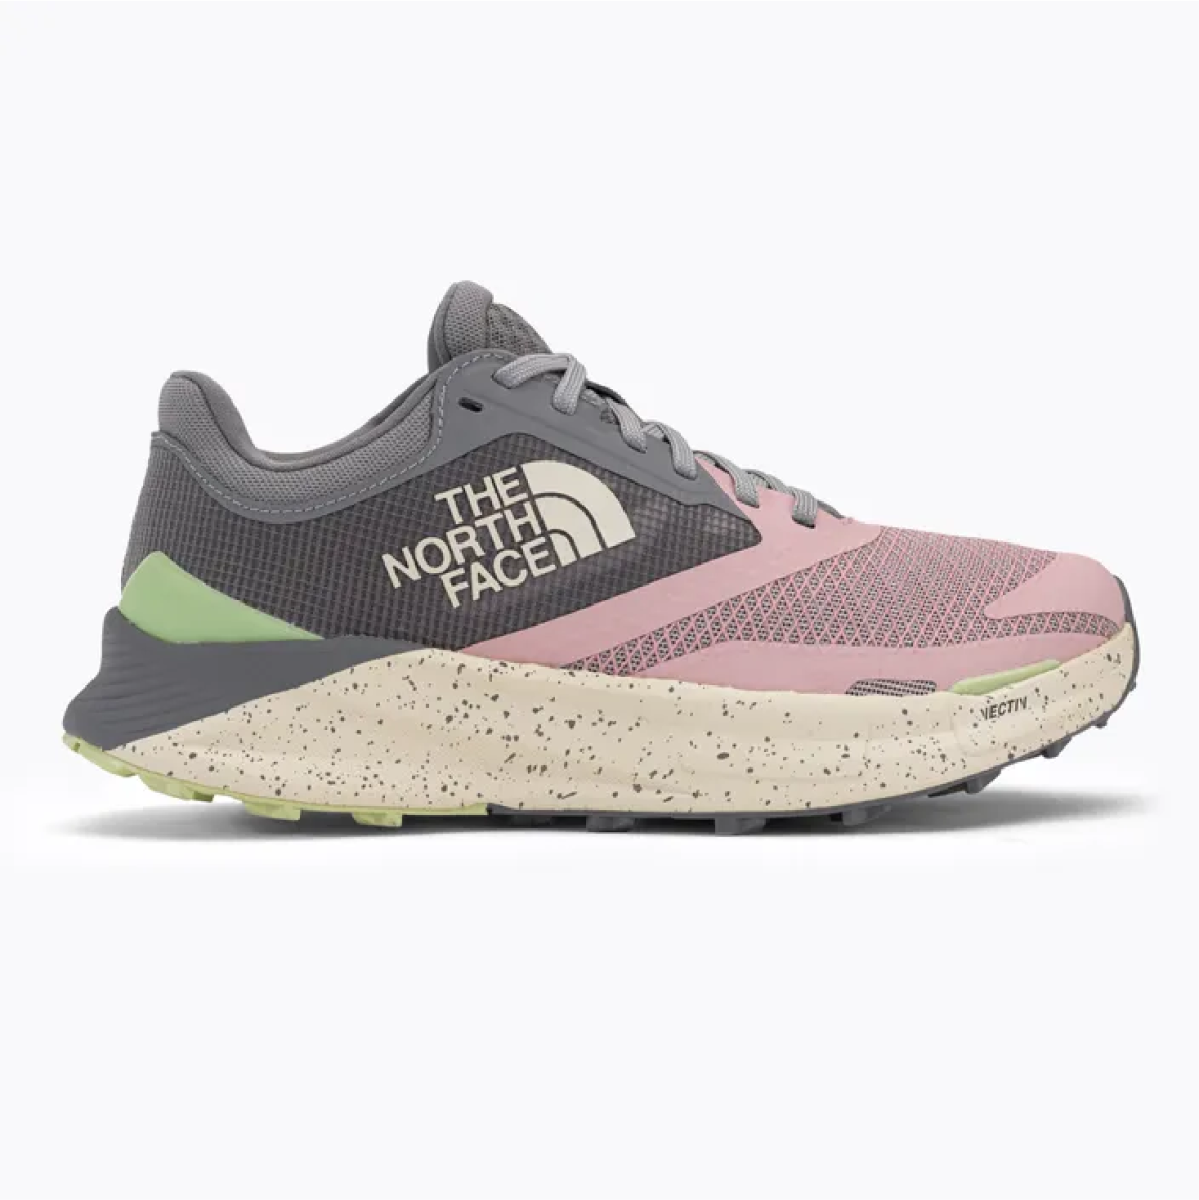 THE NORTH FACE ENDURIS III Femme Pink/Meld Grey